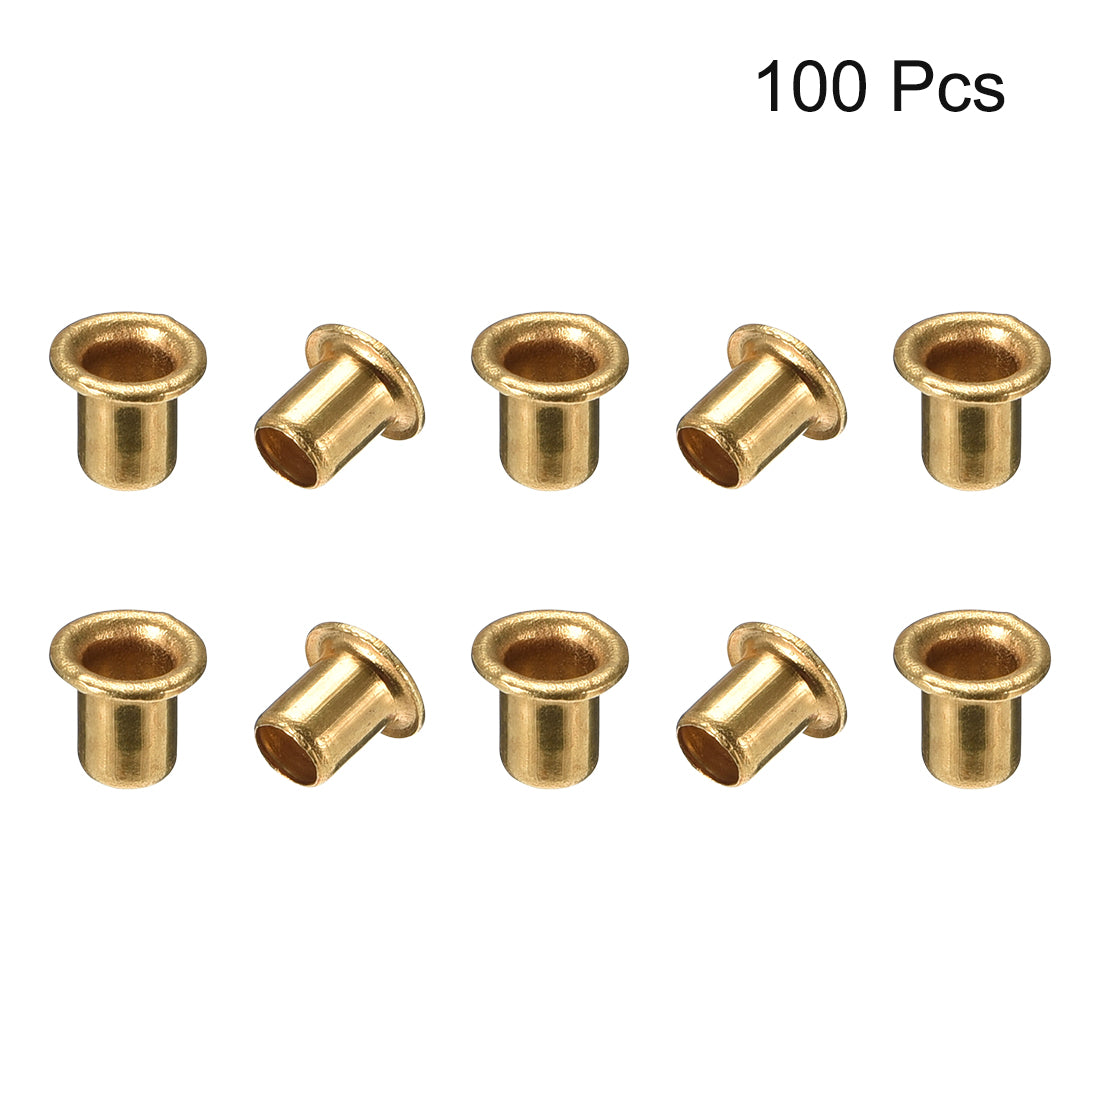 uxcell Uxcell Hollow Rivet,4mm x 5mm Through Hole Copper Hollow Rivets Grommets Double-sided Circuit Board PCB 100Pcs